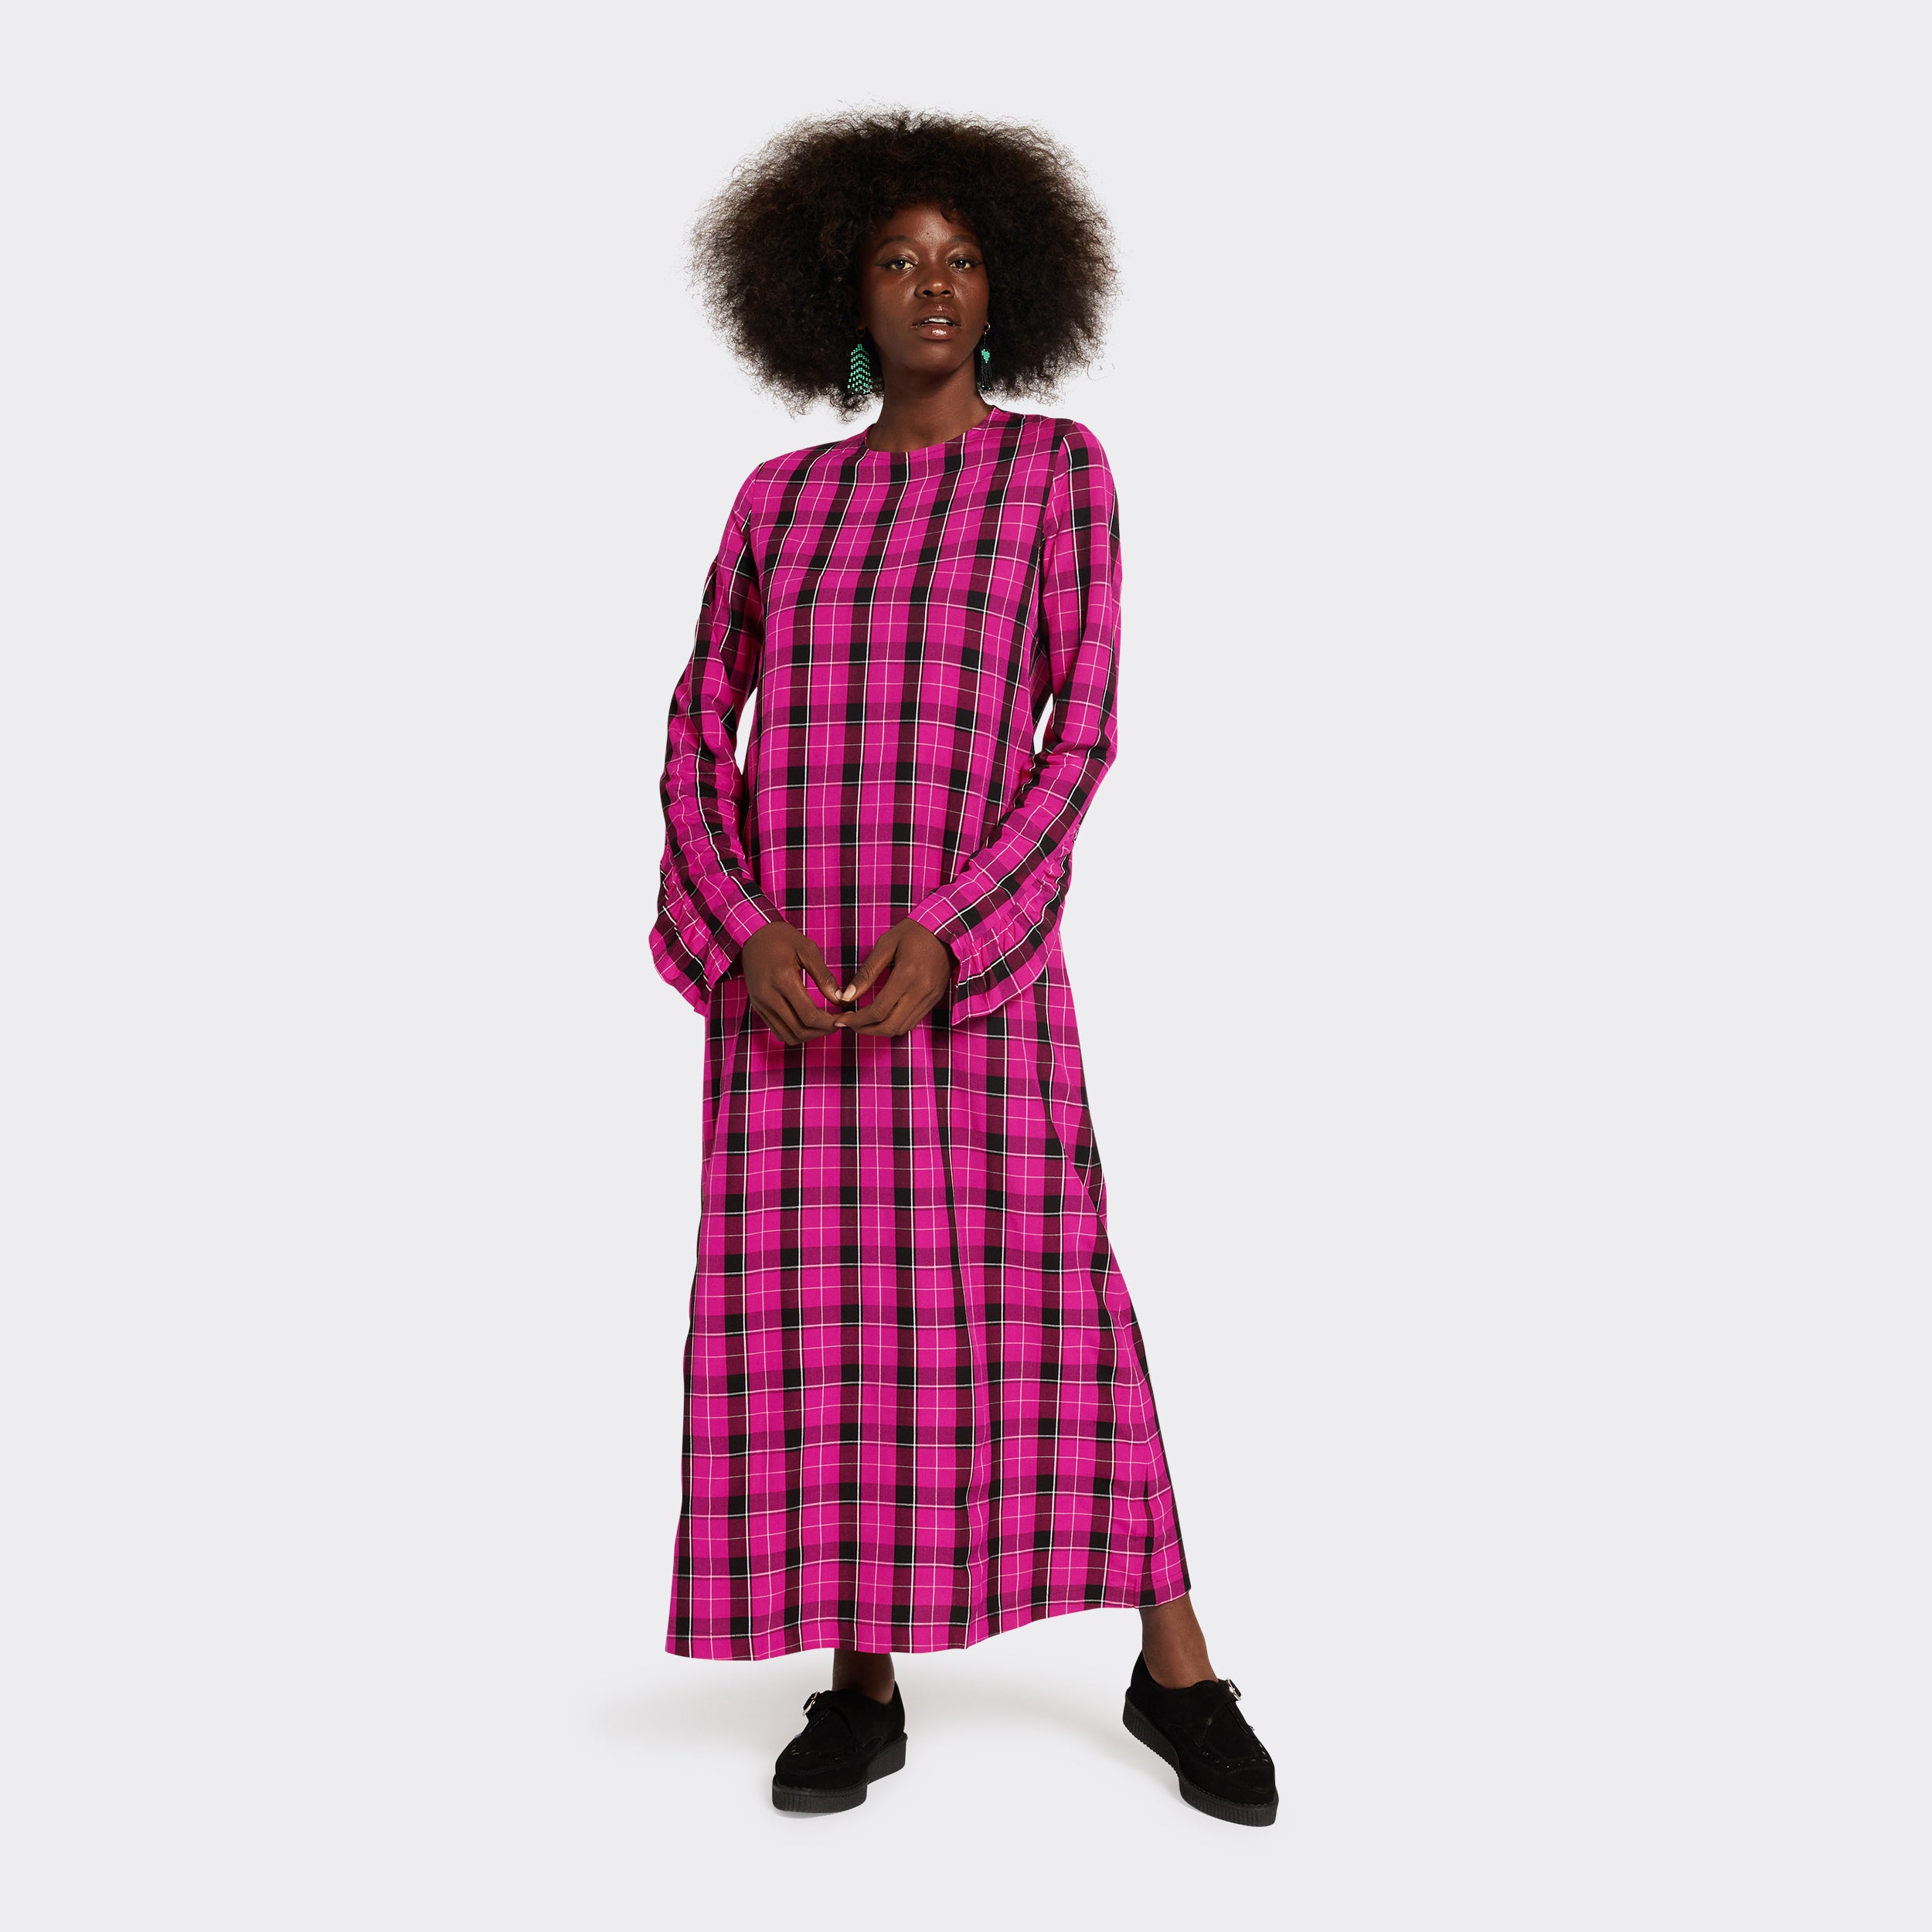 Long pink dress in Maasai fabric with black checks on model